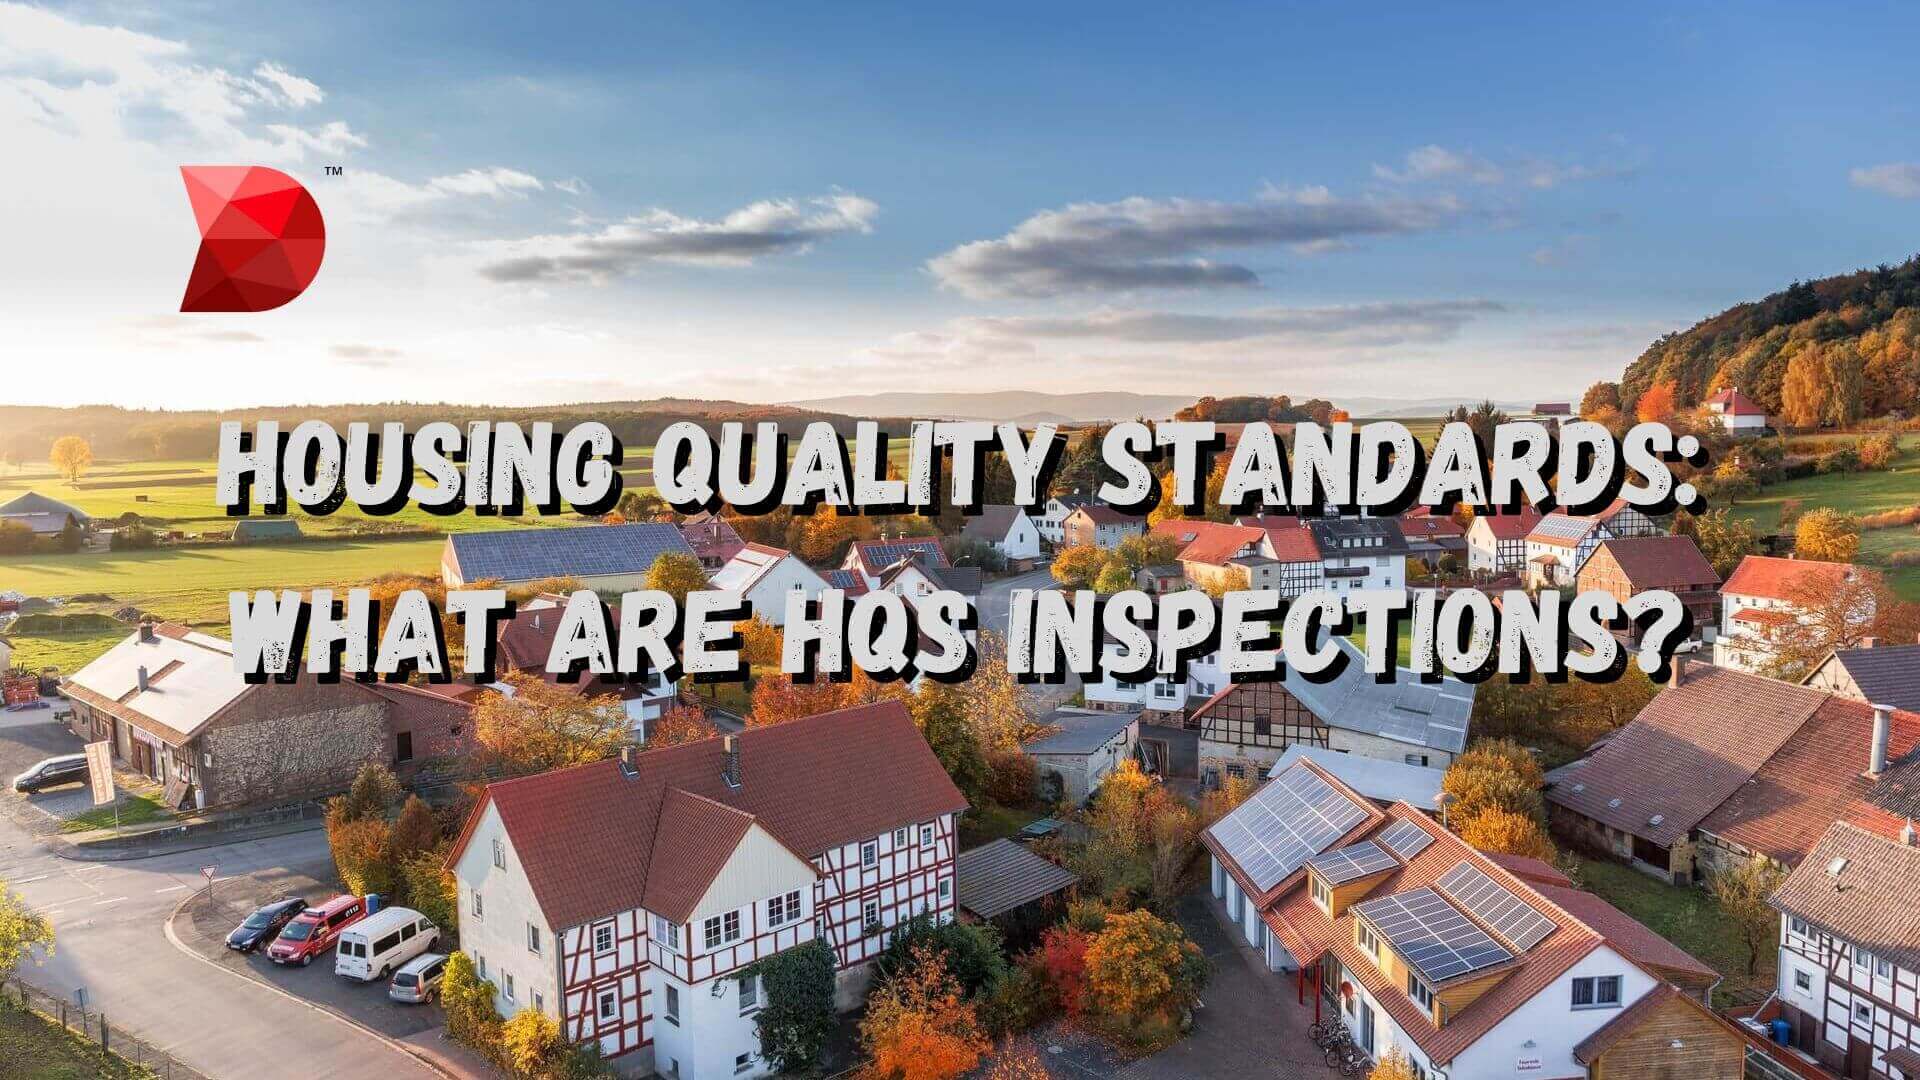 Housing Quality Standards What are HQS Inspections